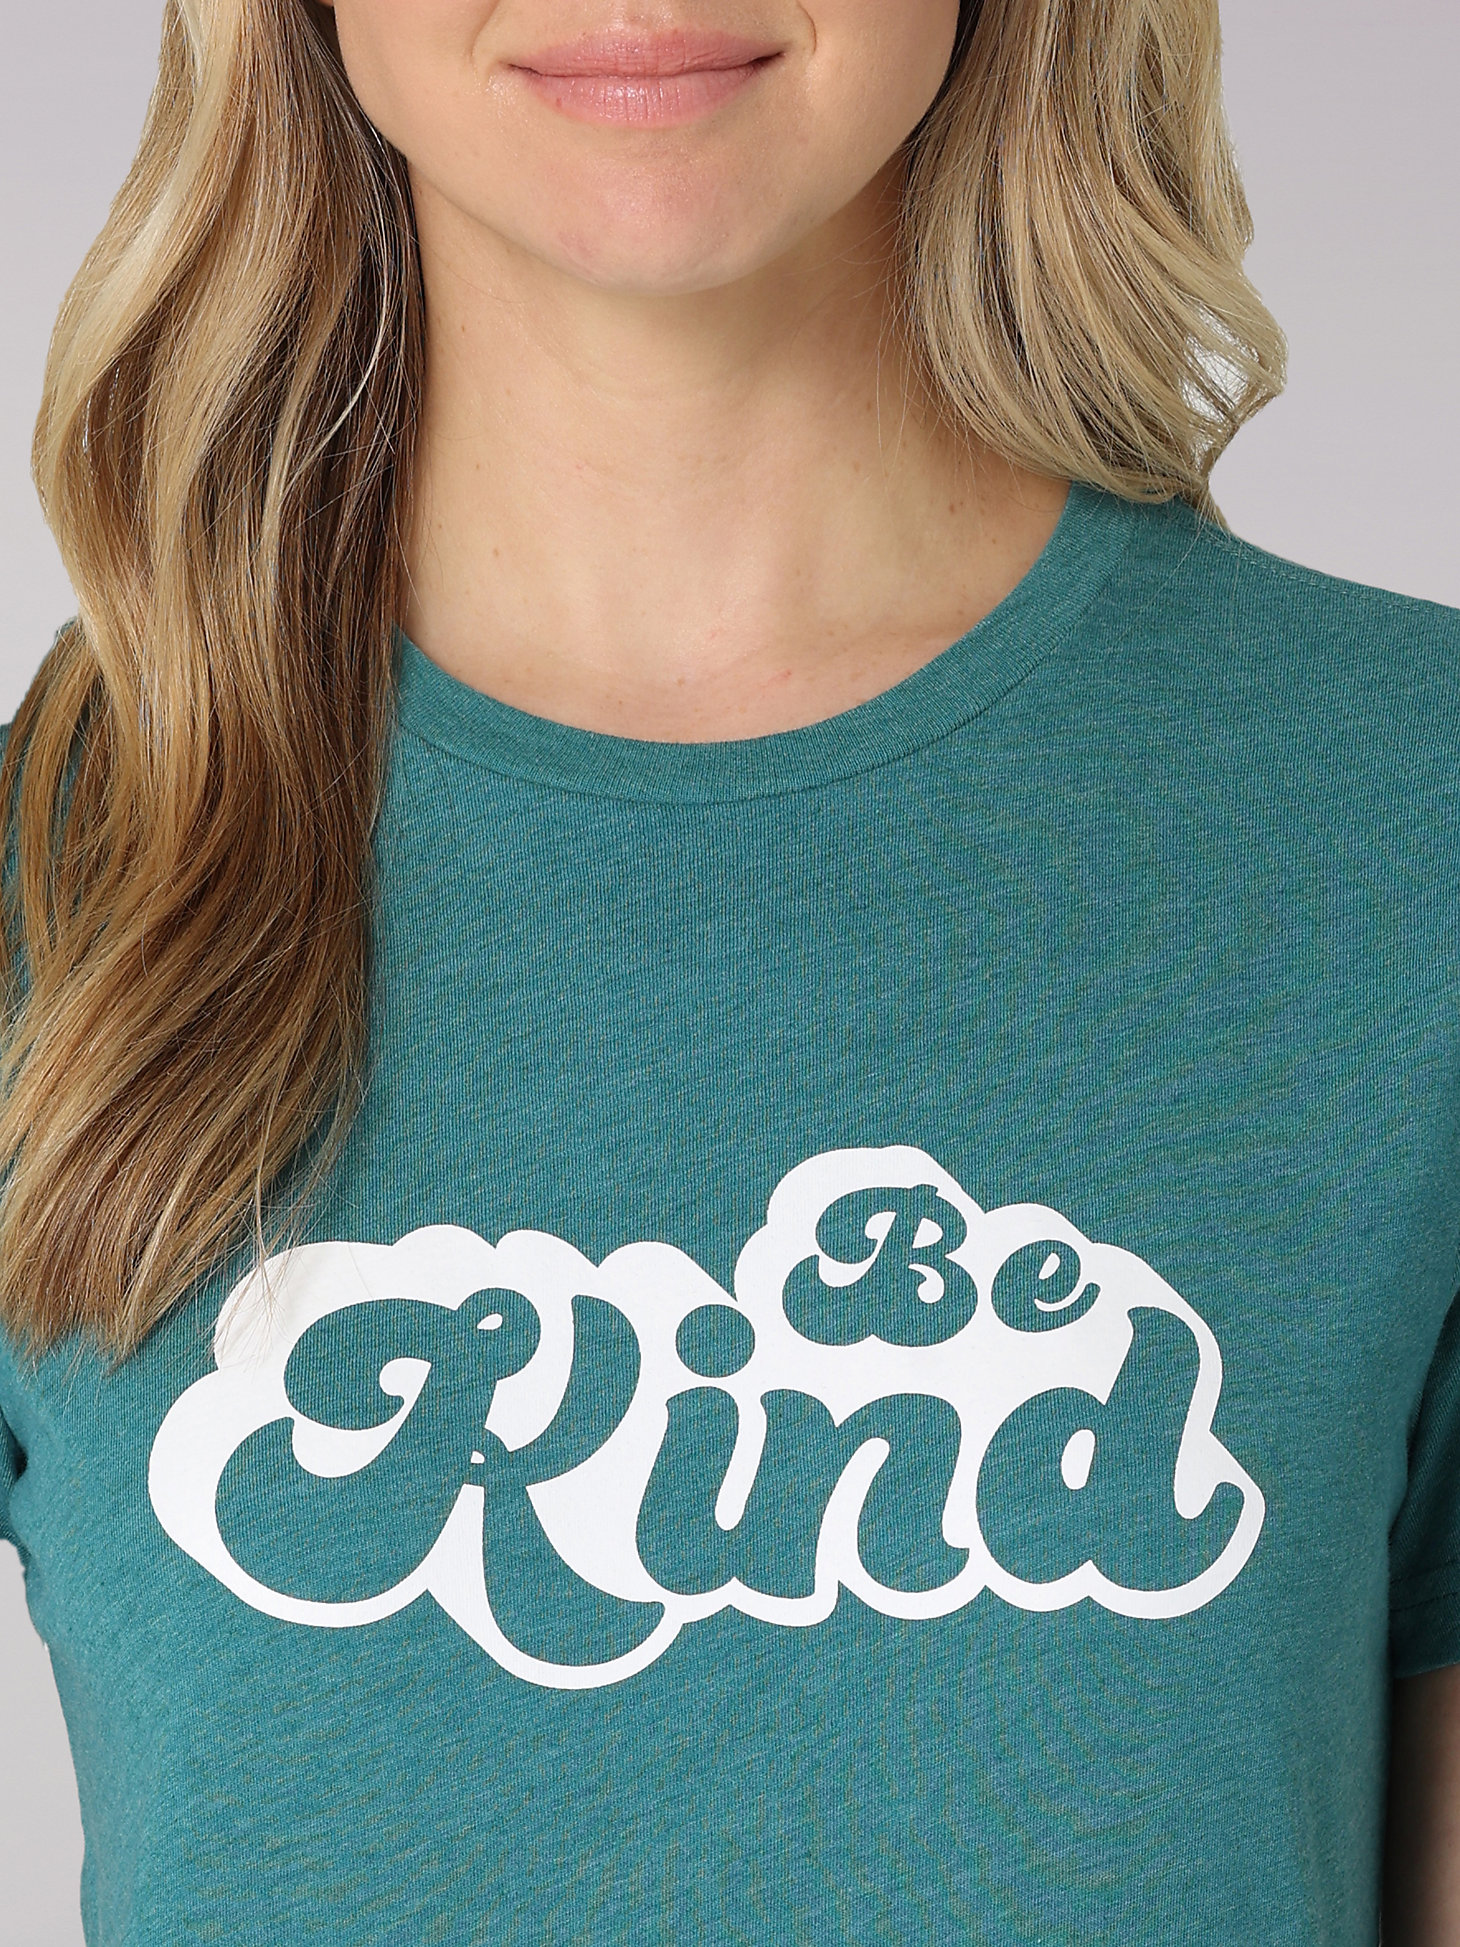 Women's Lee Be Kind Graphic Tee in Midway Teal Heather alternative view 2